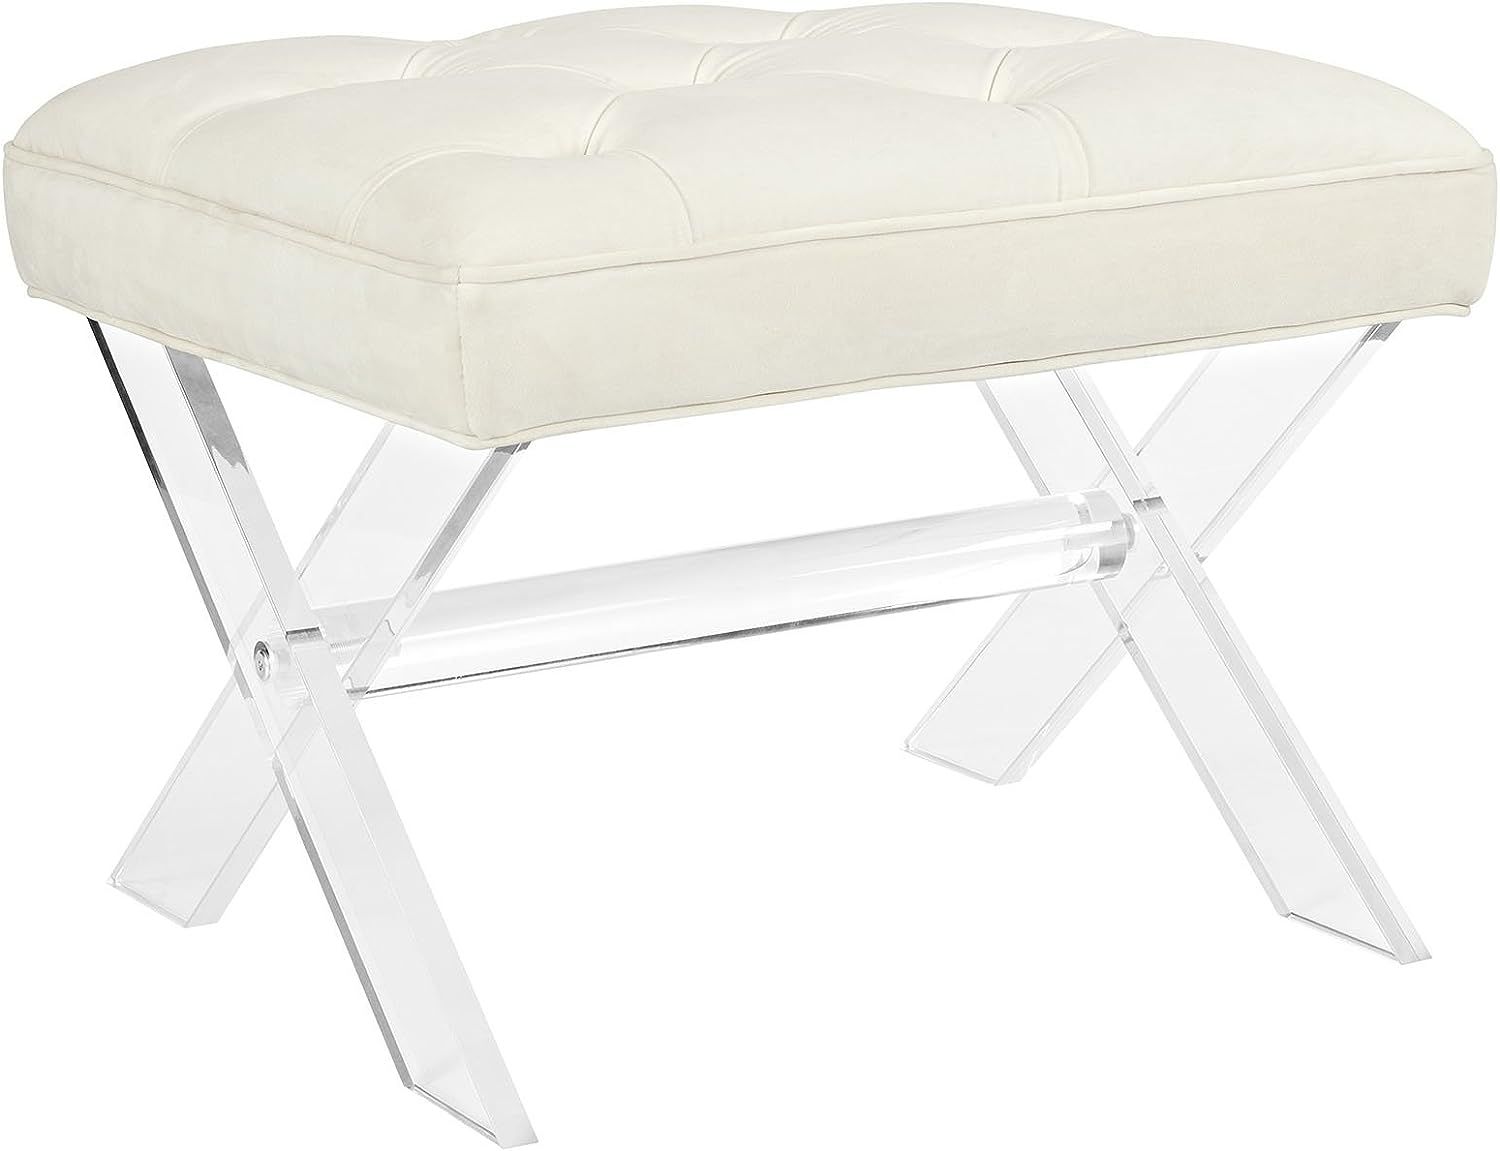 Modway Swift Acrylic X-Base Entryway Modern Bench With Tufted Fabric Upholstery in Ivory | Amazon (US)